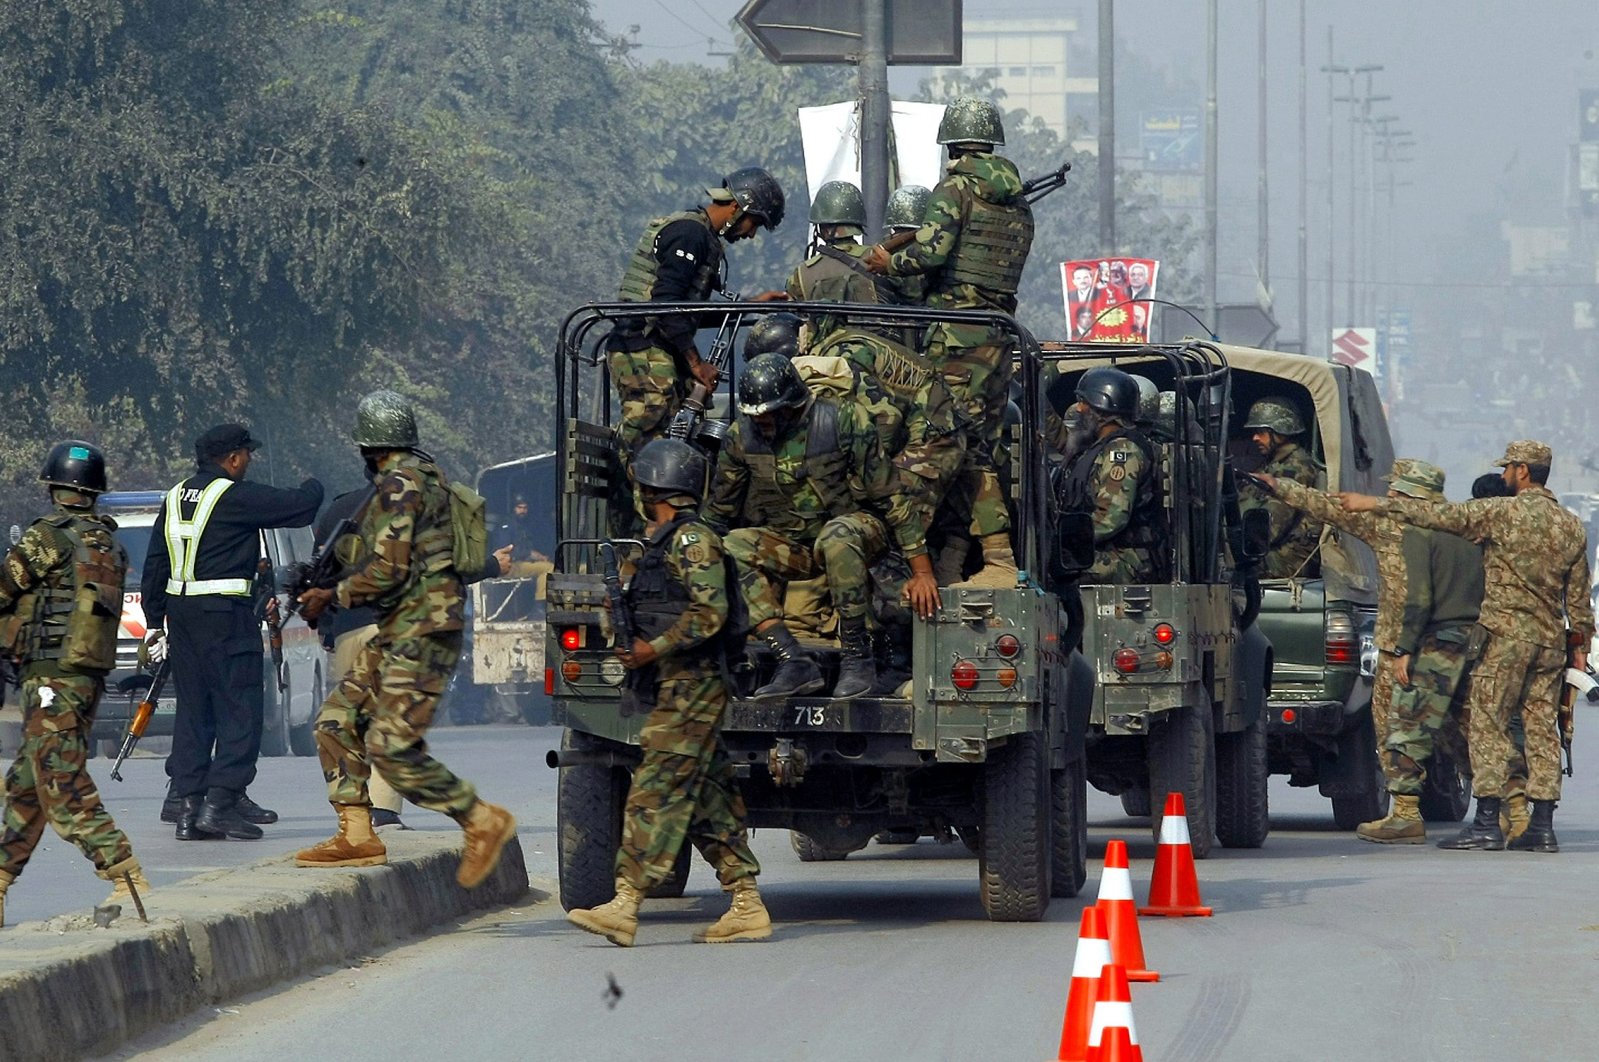 Pakistan Army troops arrive to conduct an operation at a school under attack by Taliban gunmen in Peshawar, Pakistan, Dec. 16, 2014. (AP Photo)